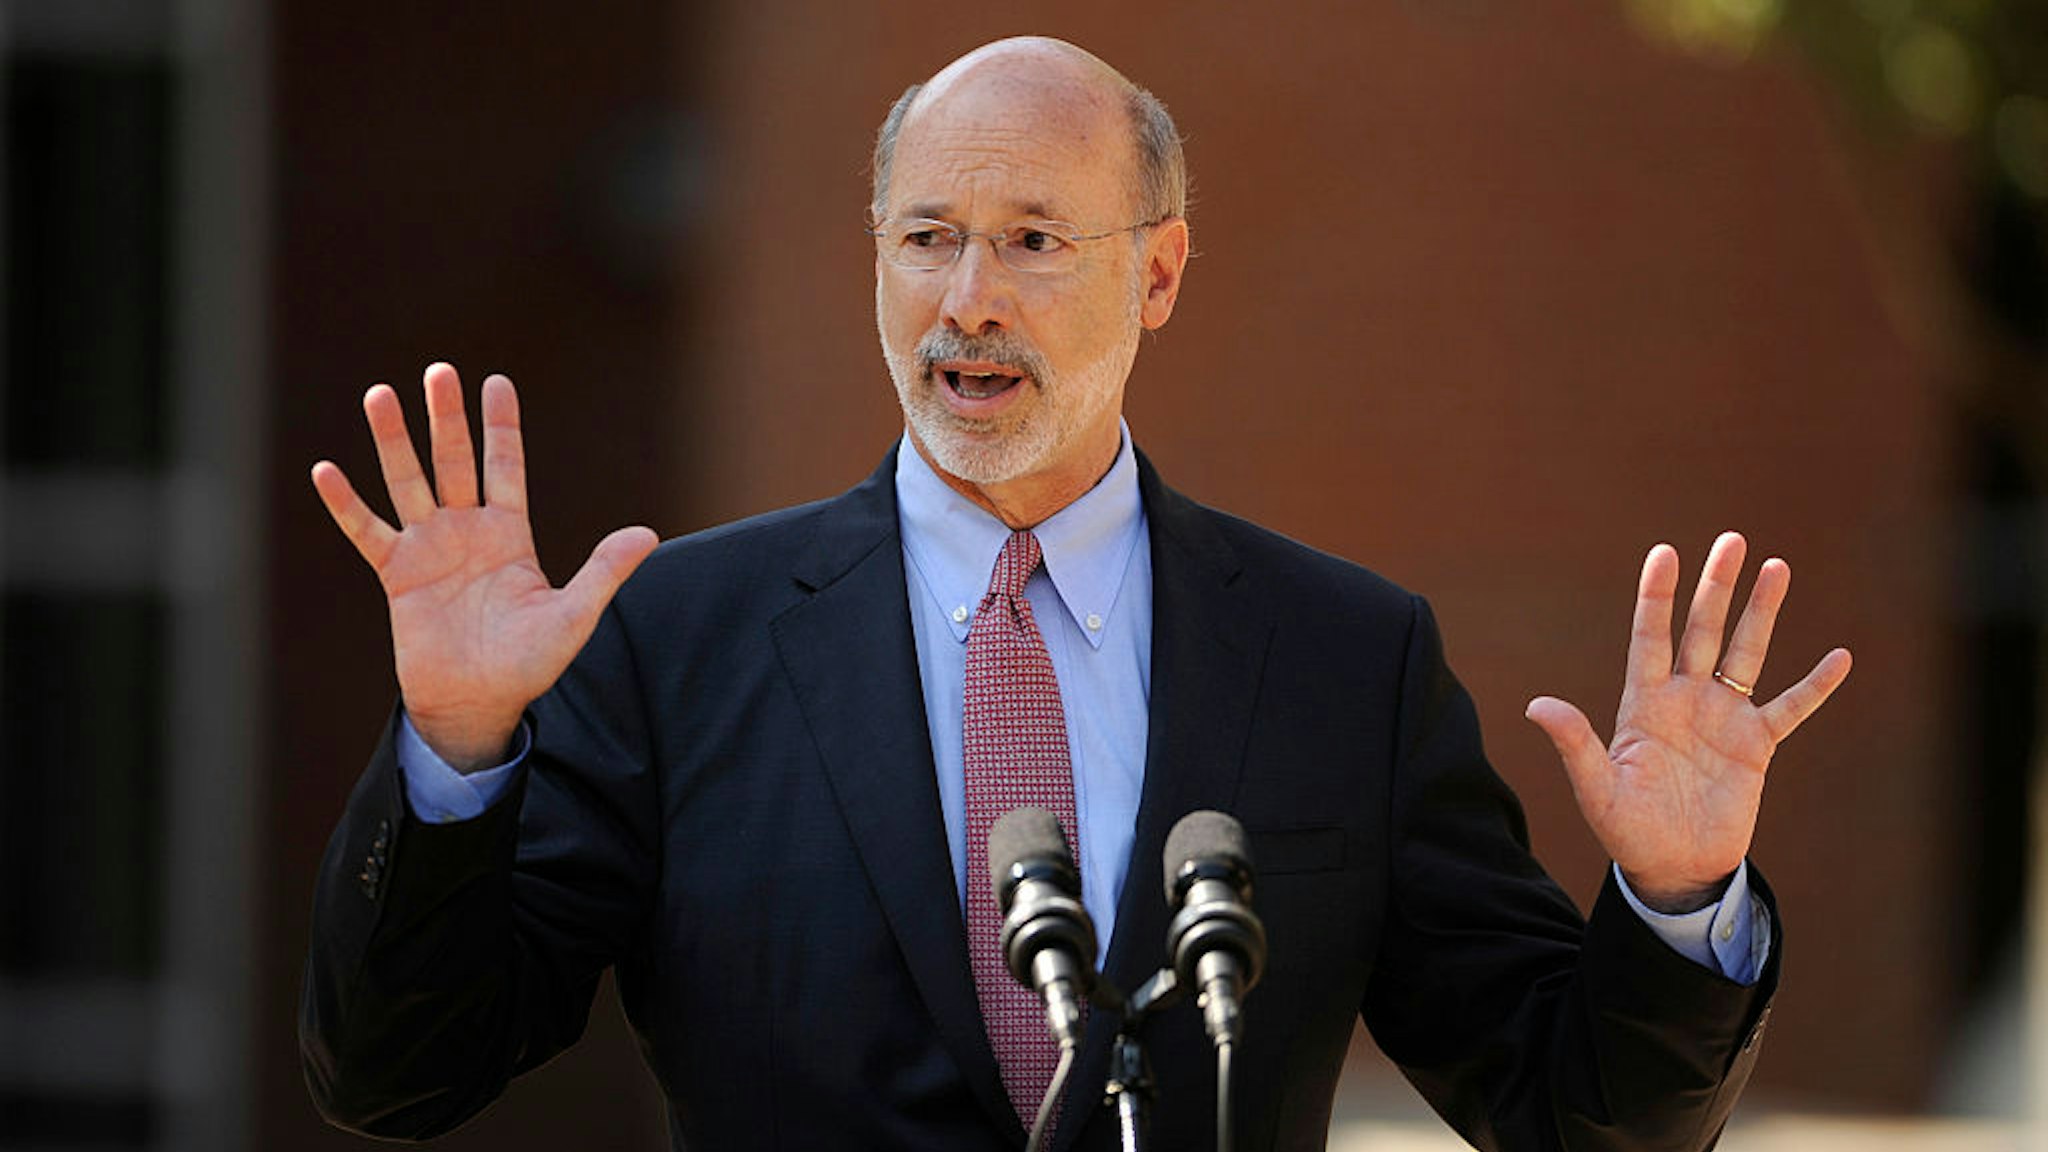 Gov. Tom Wolf speaks in front of Bellefonte Area High School on July 13, 2015 in Bellefonte, Pa. Gov. Wolf visited the school to talk about the Pennsylvania budget. (Nabil K. Mark/Centre Daily Times/Tribune News Service via Getty Images)